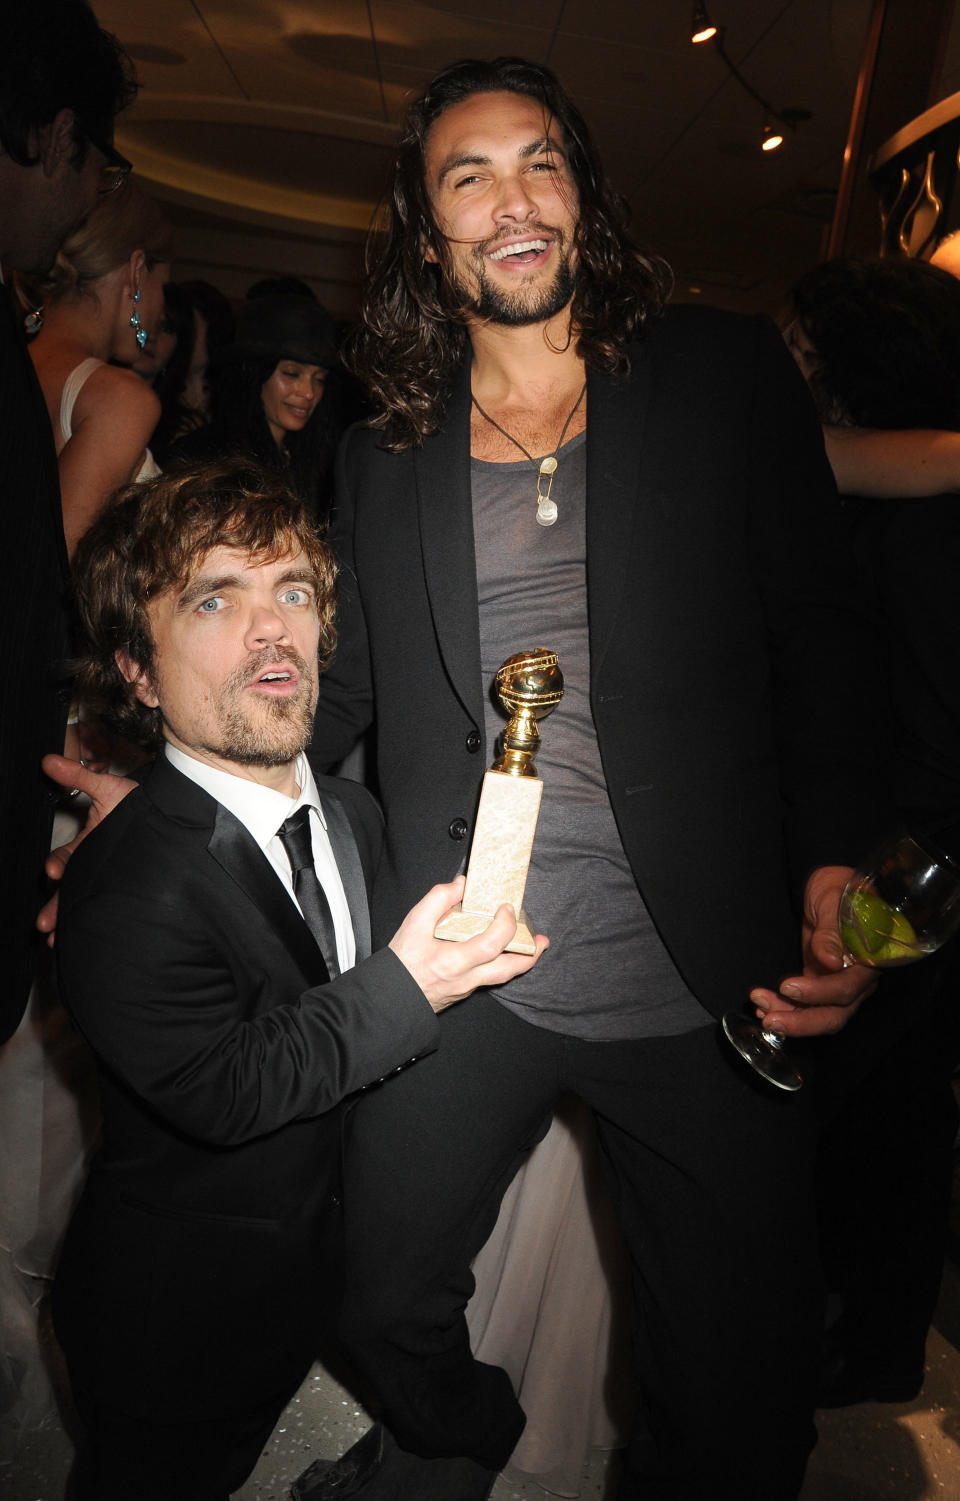 BEVERLY HILLS, CA - JANUARY 15:(EXCLUSIVE COVERAGE)   Actors Peter Dinklage and Jason Momoa attends HBO's Official After Party for the 69th Annual Golden Globe Awards held at The Beverly Hilton hotel on January 15, 2012 in Beverly Hills, California.  (Photo by Jeff Kravitz/FilmMagic)